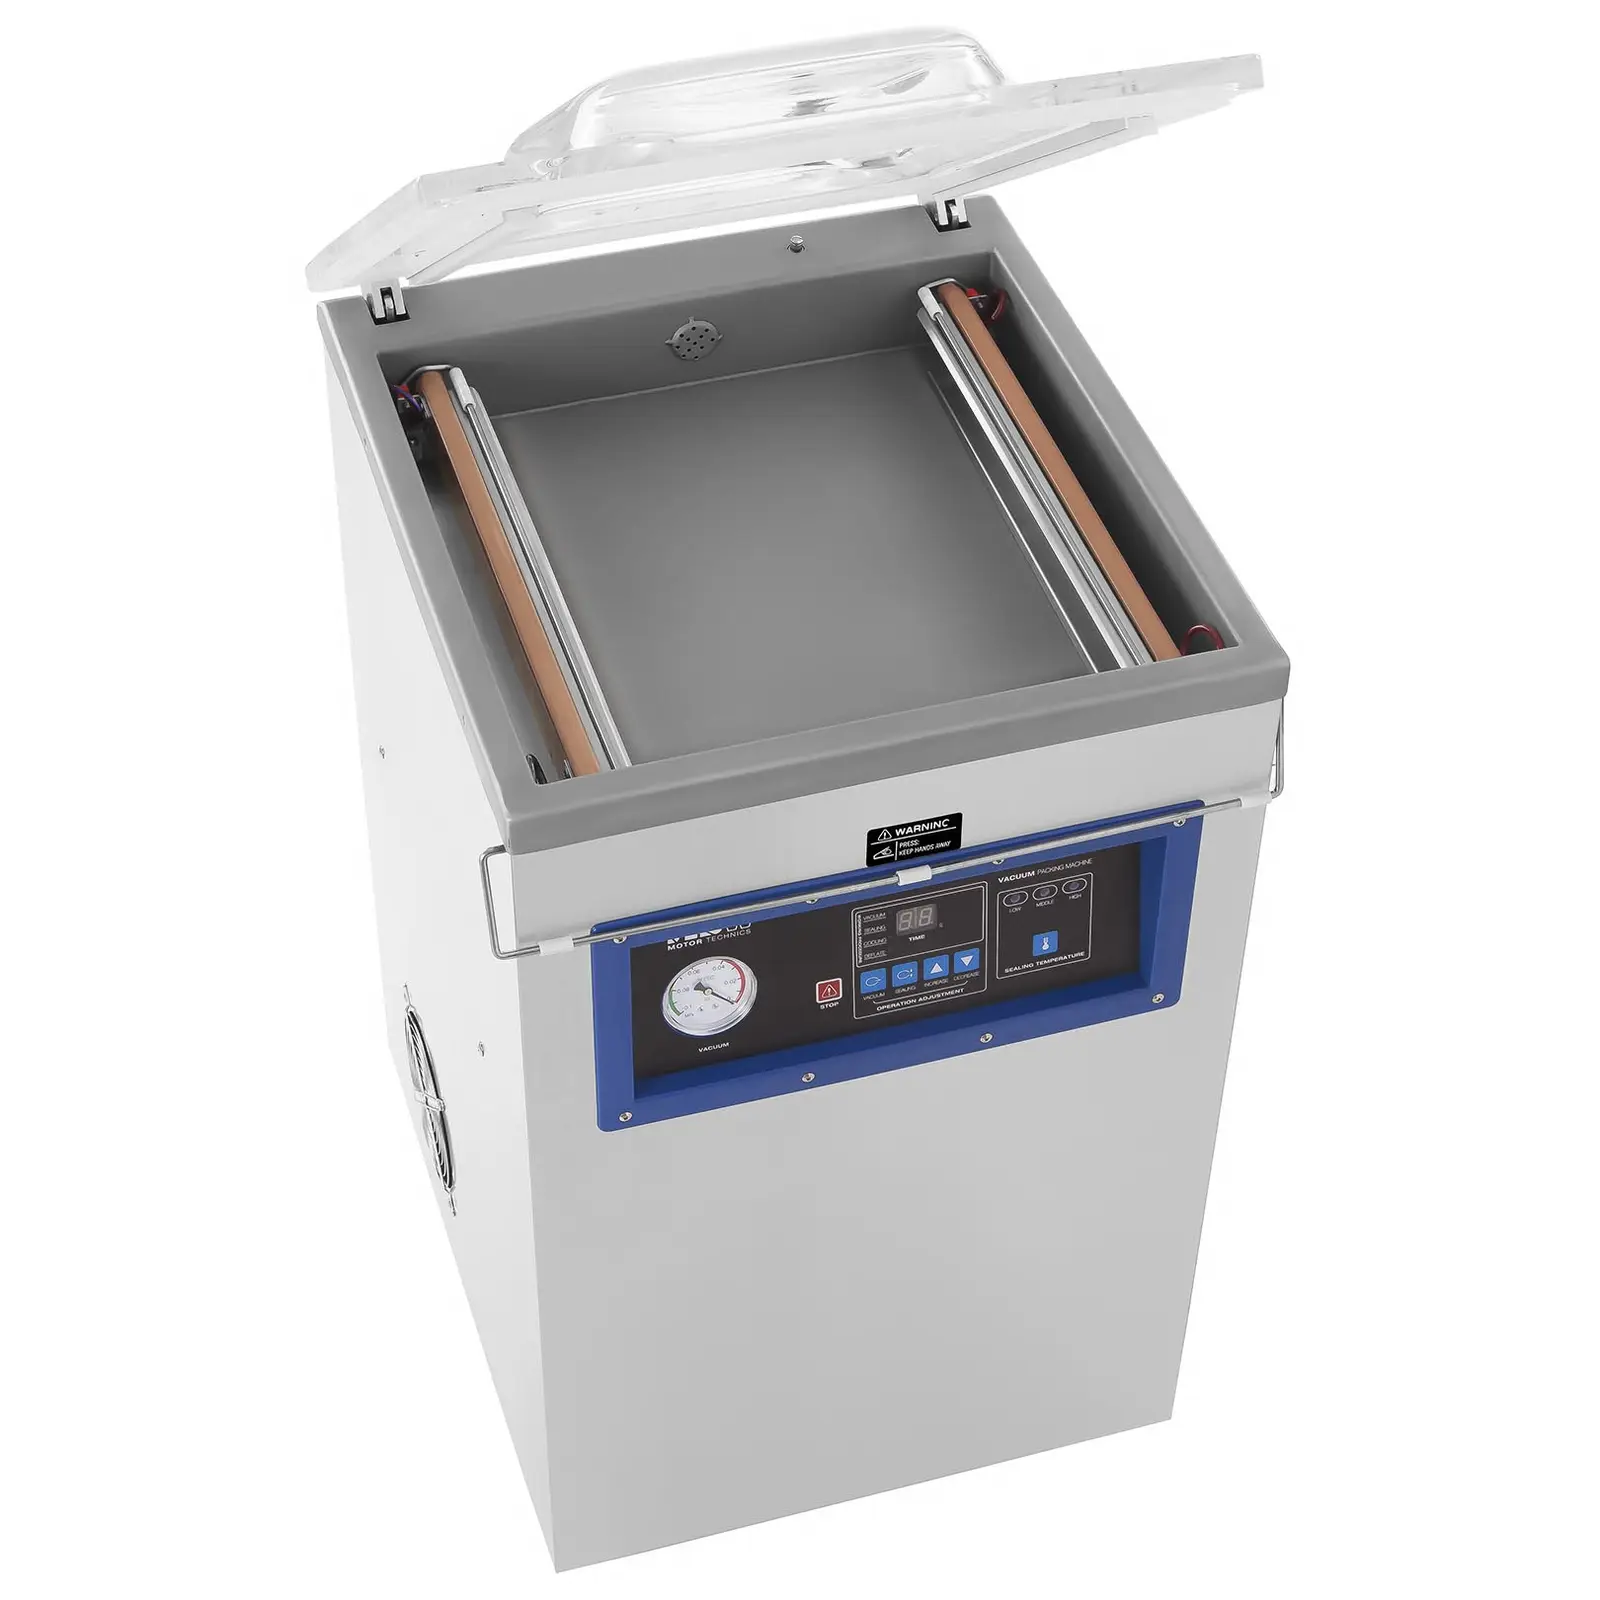 Vacuum Packaging Machine with trolley - 900 W